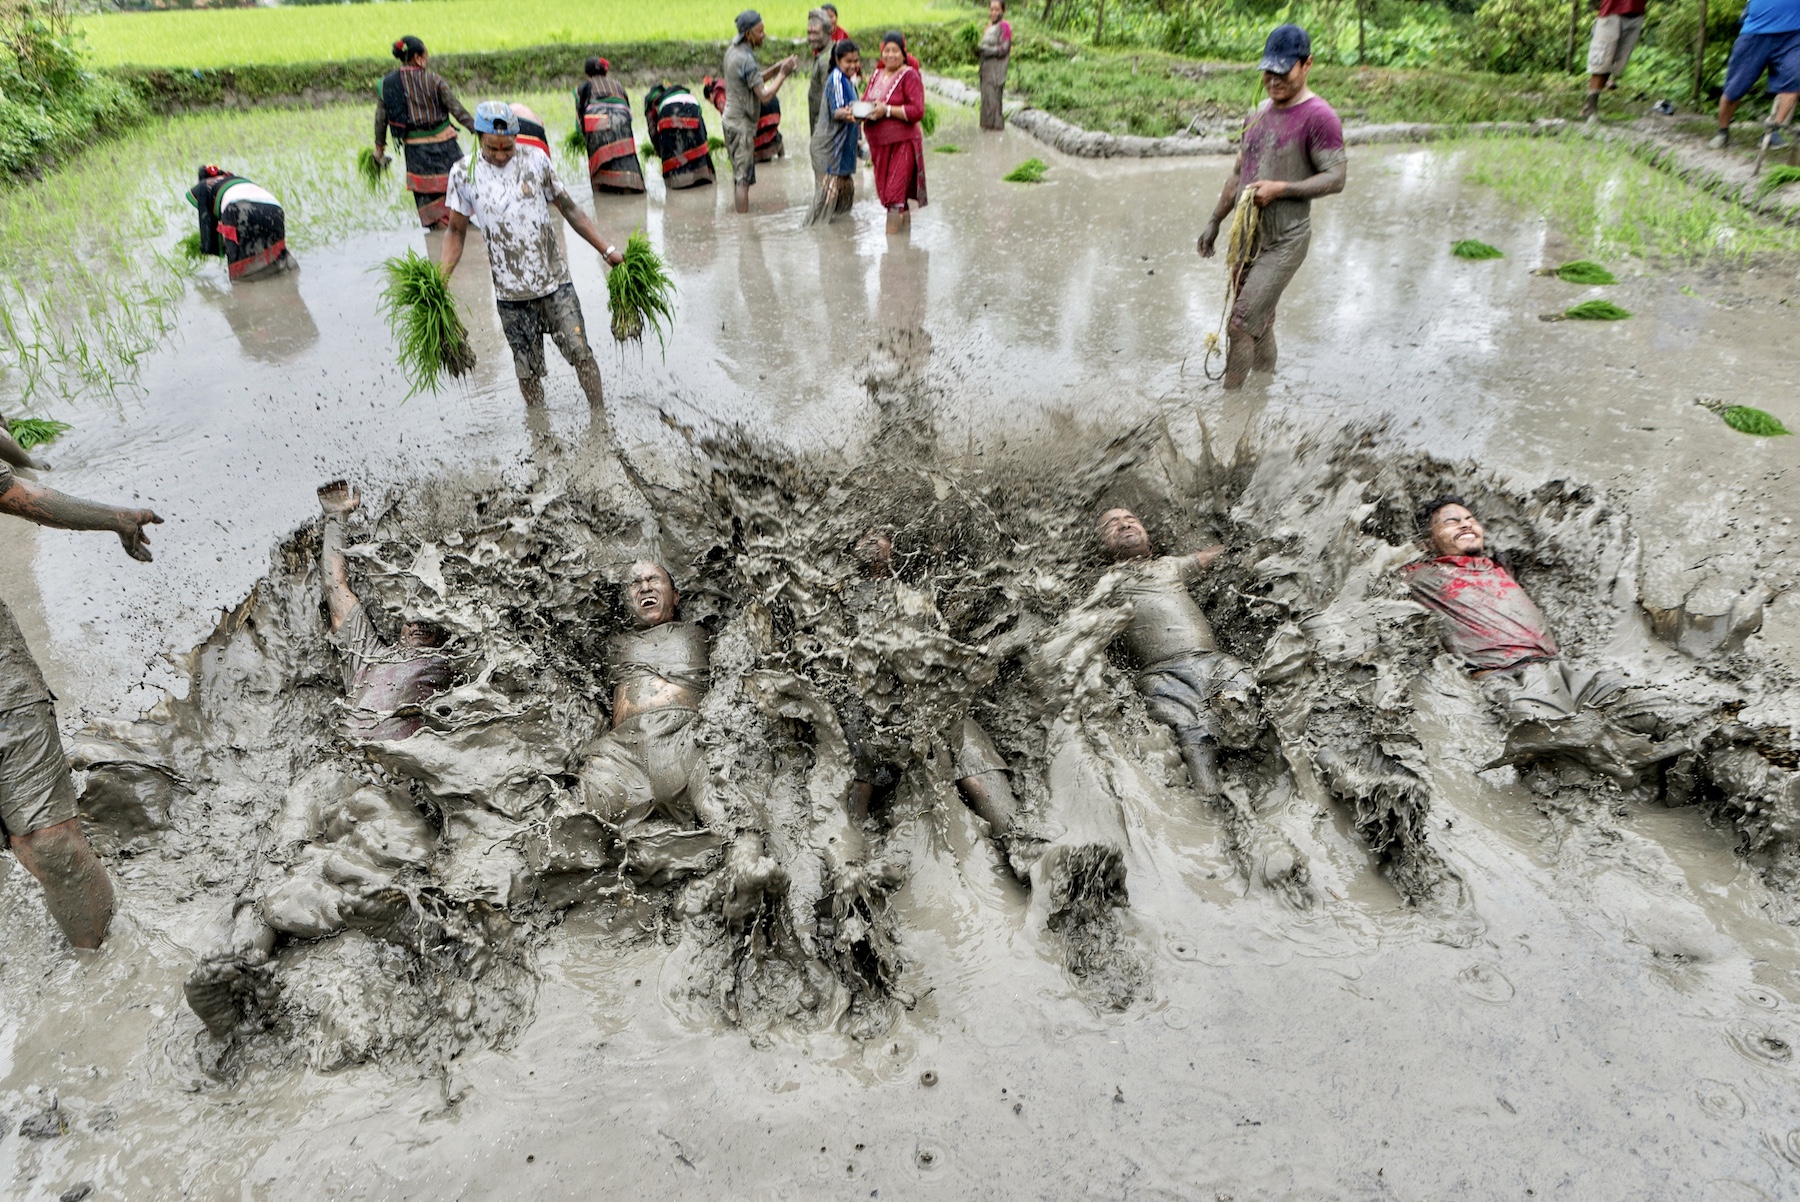 People fall back into mud water in a paddy field.